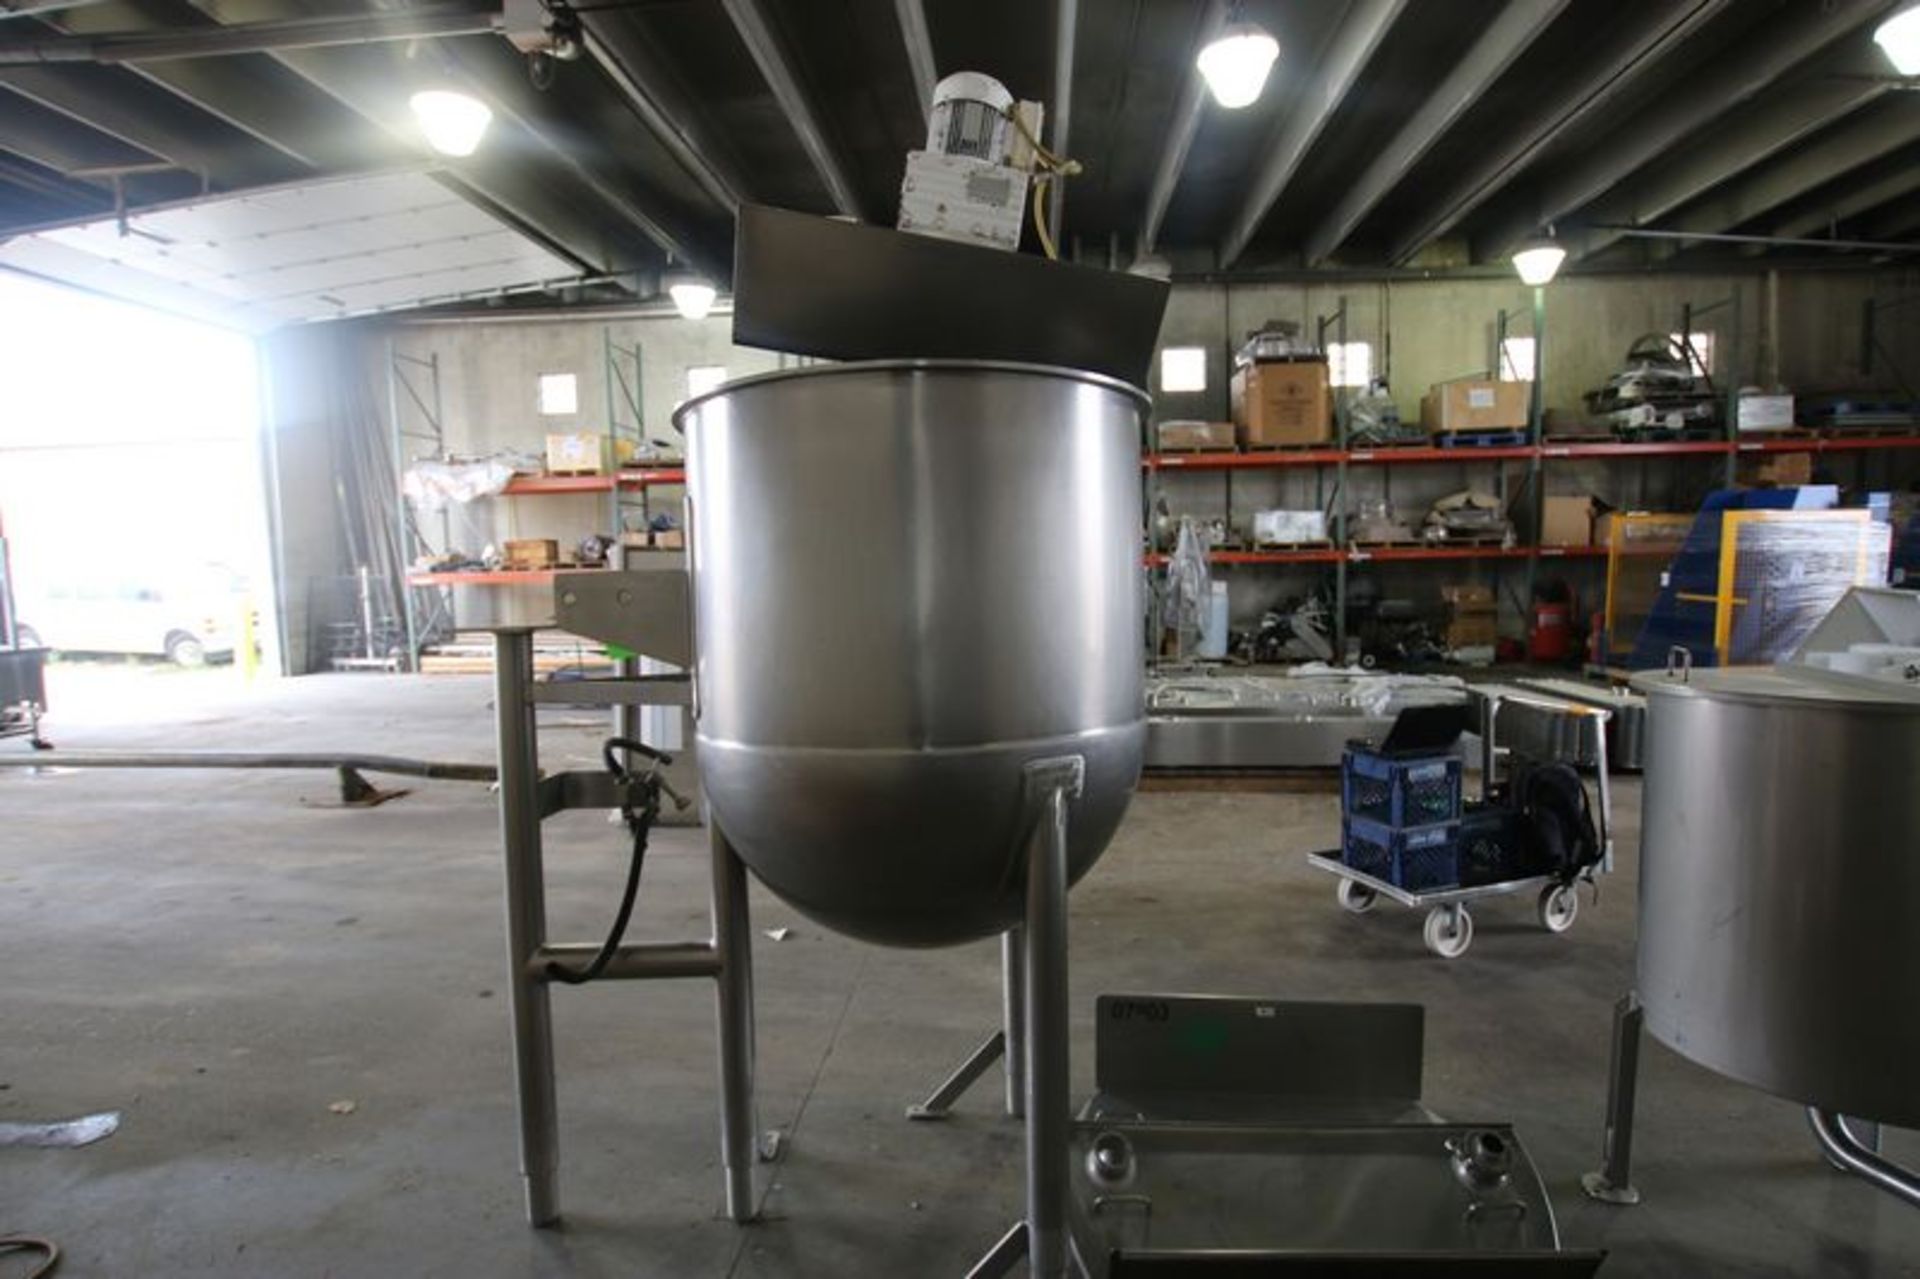 Lee 225 Gallon S/S Kettle. Model 225 A1OT. S/N 17389-1-2. Equipped with Snuggler Sweep Agitation and - Image 4 of 10